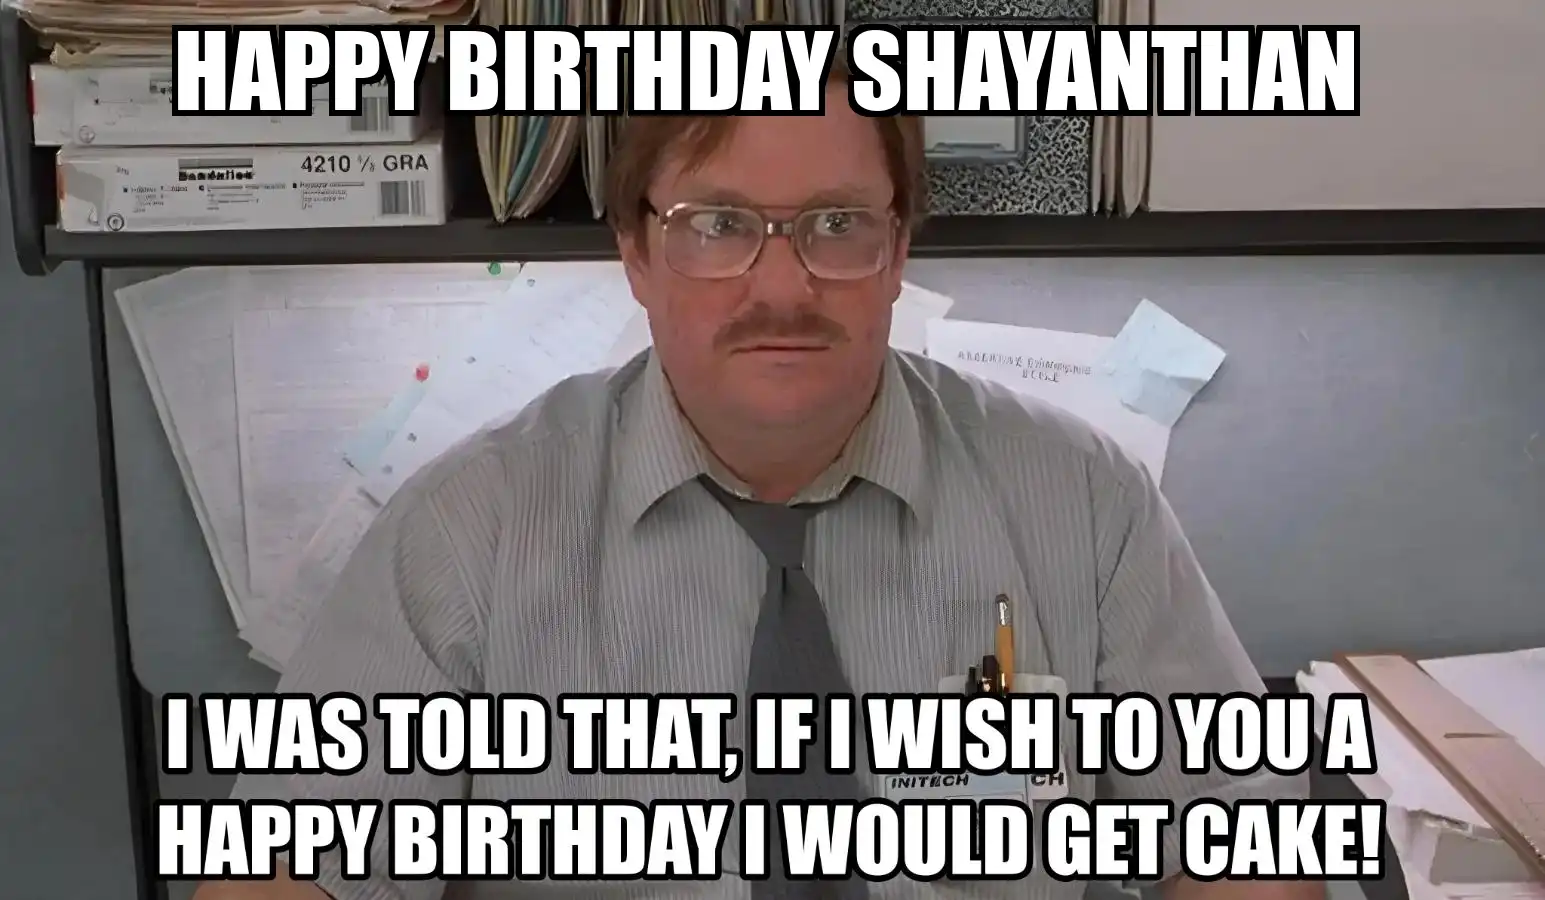 Happy Birthday Shayanthan I Would Get A Cake Meme